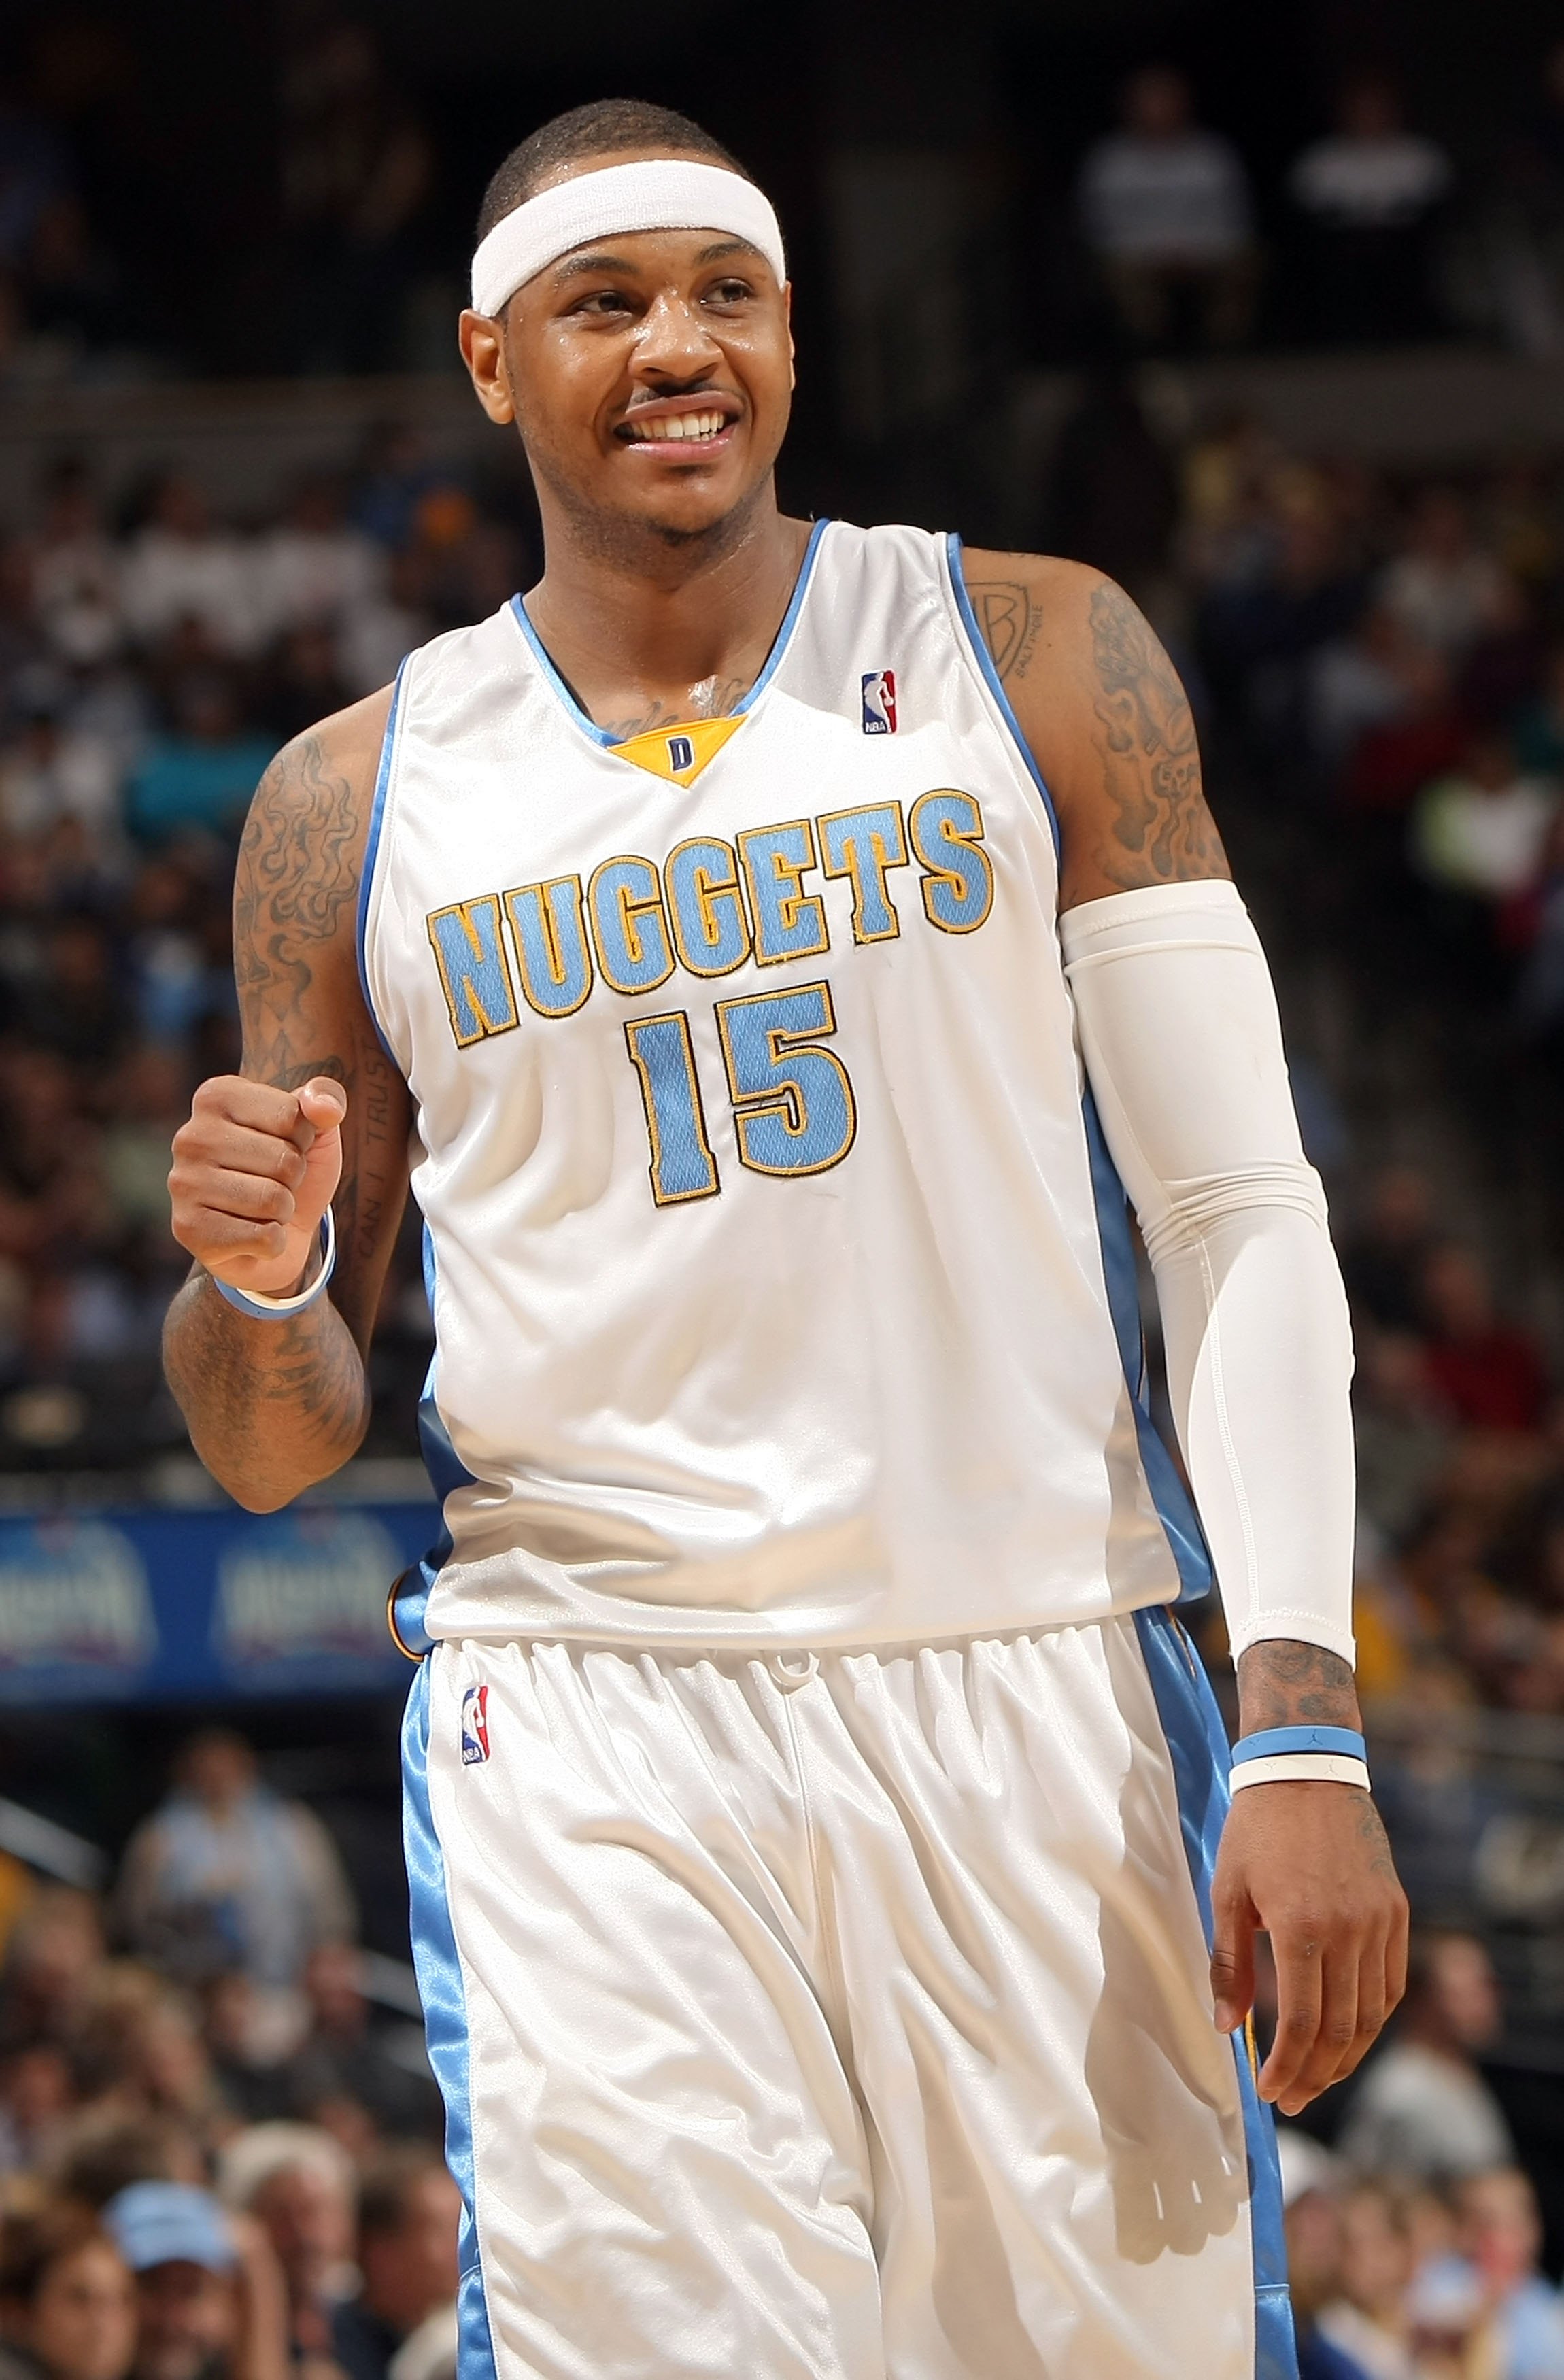 Nuggets fans don't want to see Melo leave, neither do these other players' fans.